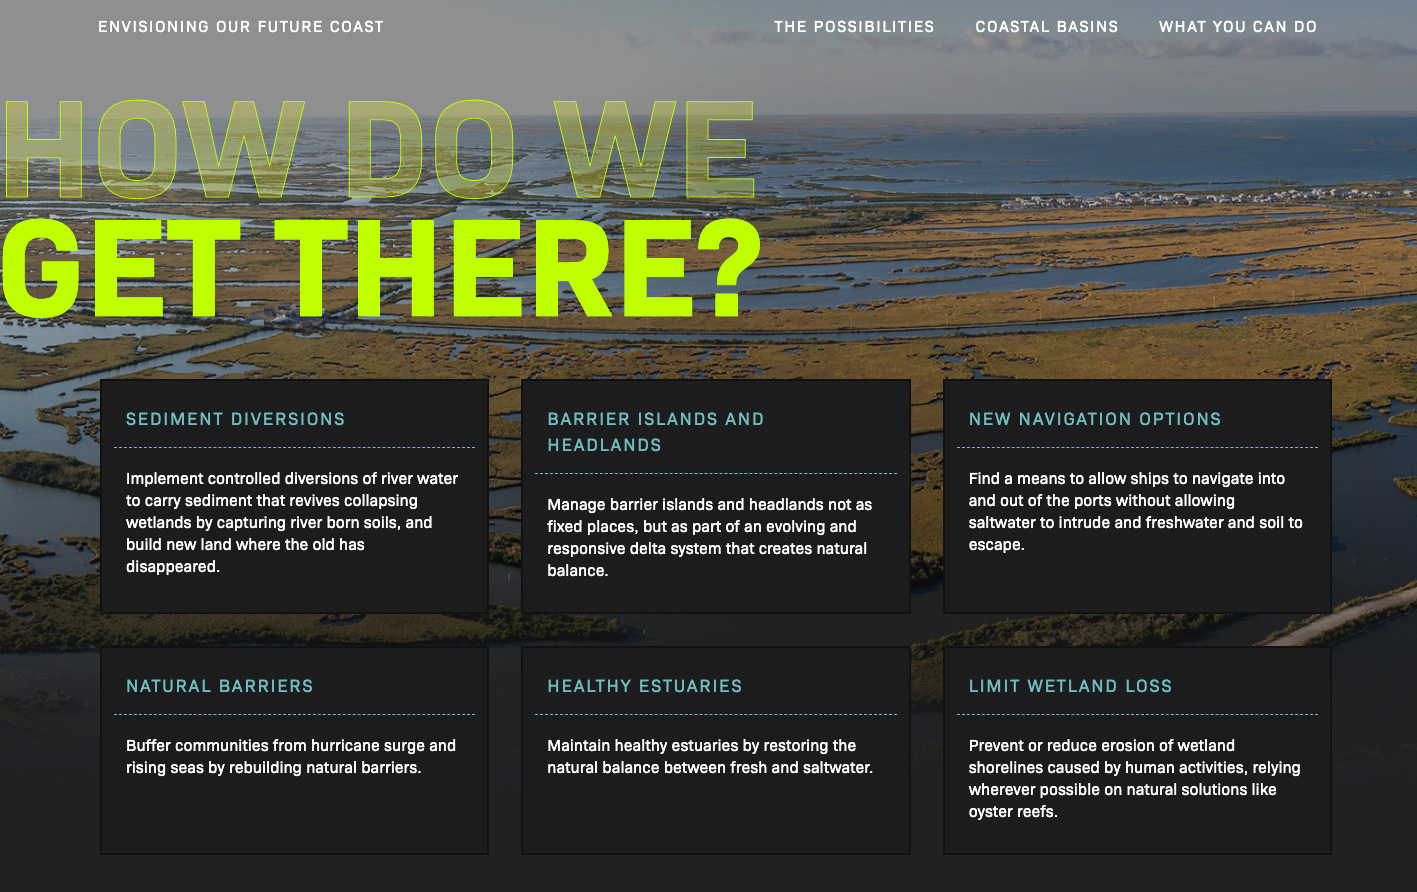 Envisioning Our Future Coast website - Deep Fried